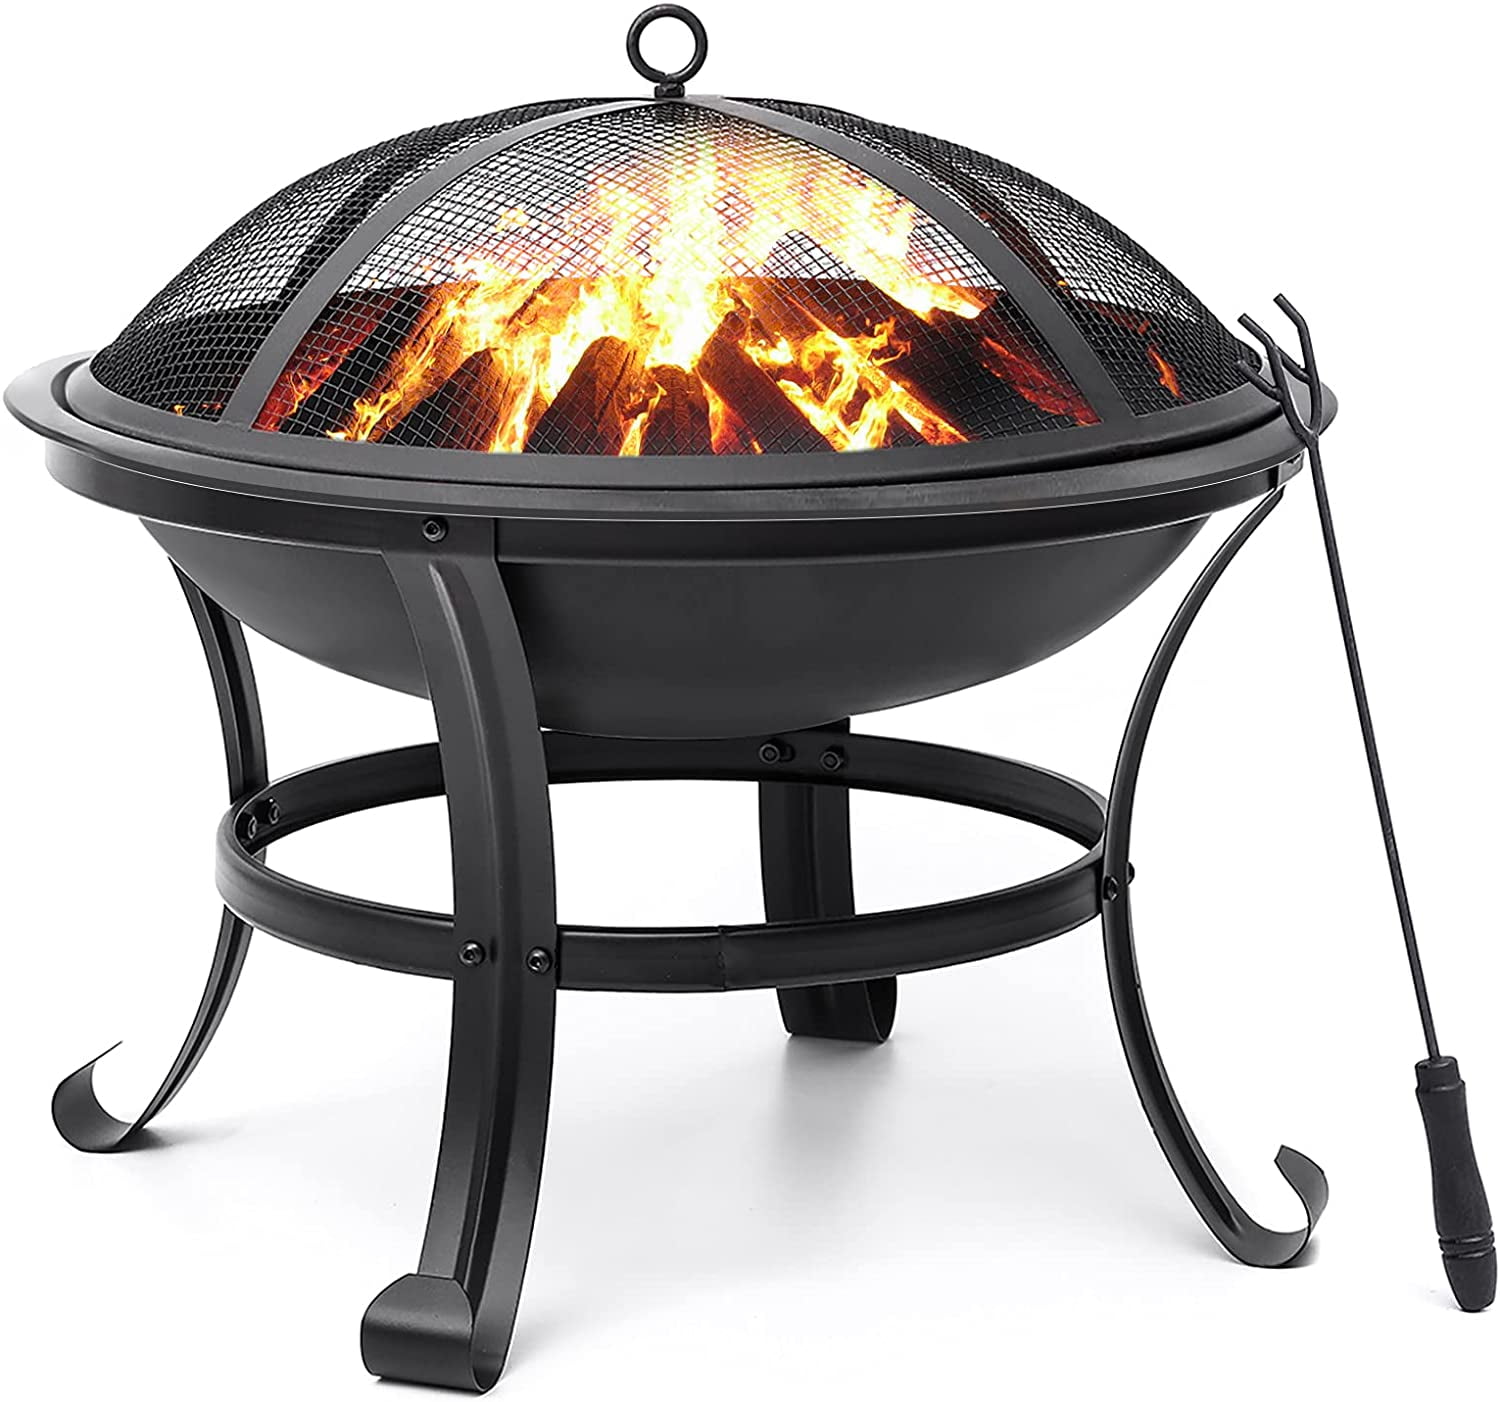 KingSo 22 inch Wood Burning Fire Pit for Camping Picnic Bonfire Patio Outside Backyard Garden Small Bonfire Pit Steel Firepit Bowl with Spark Screen, Log Grate, Poker